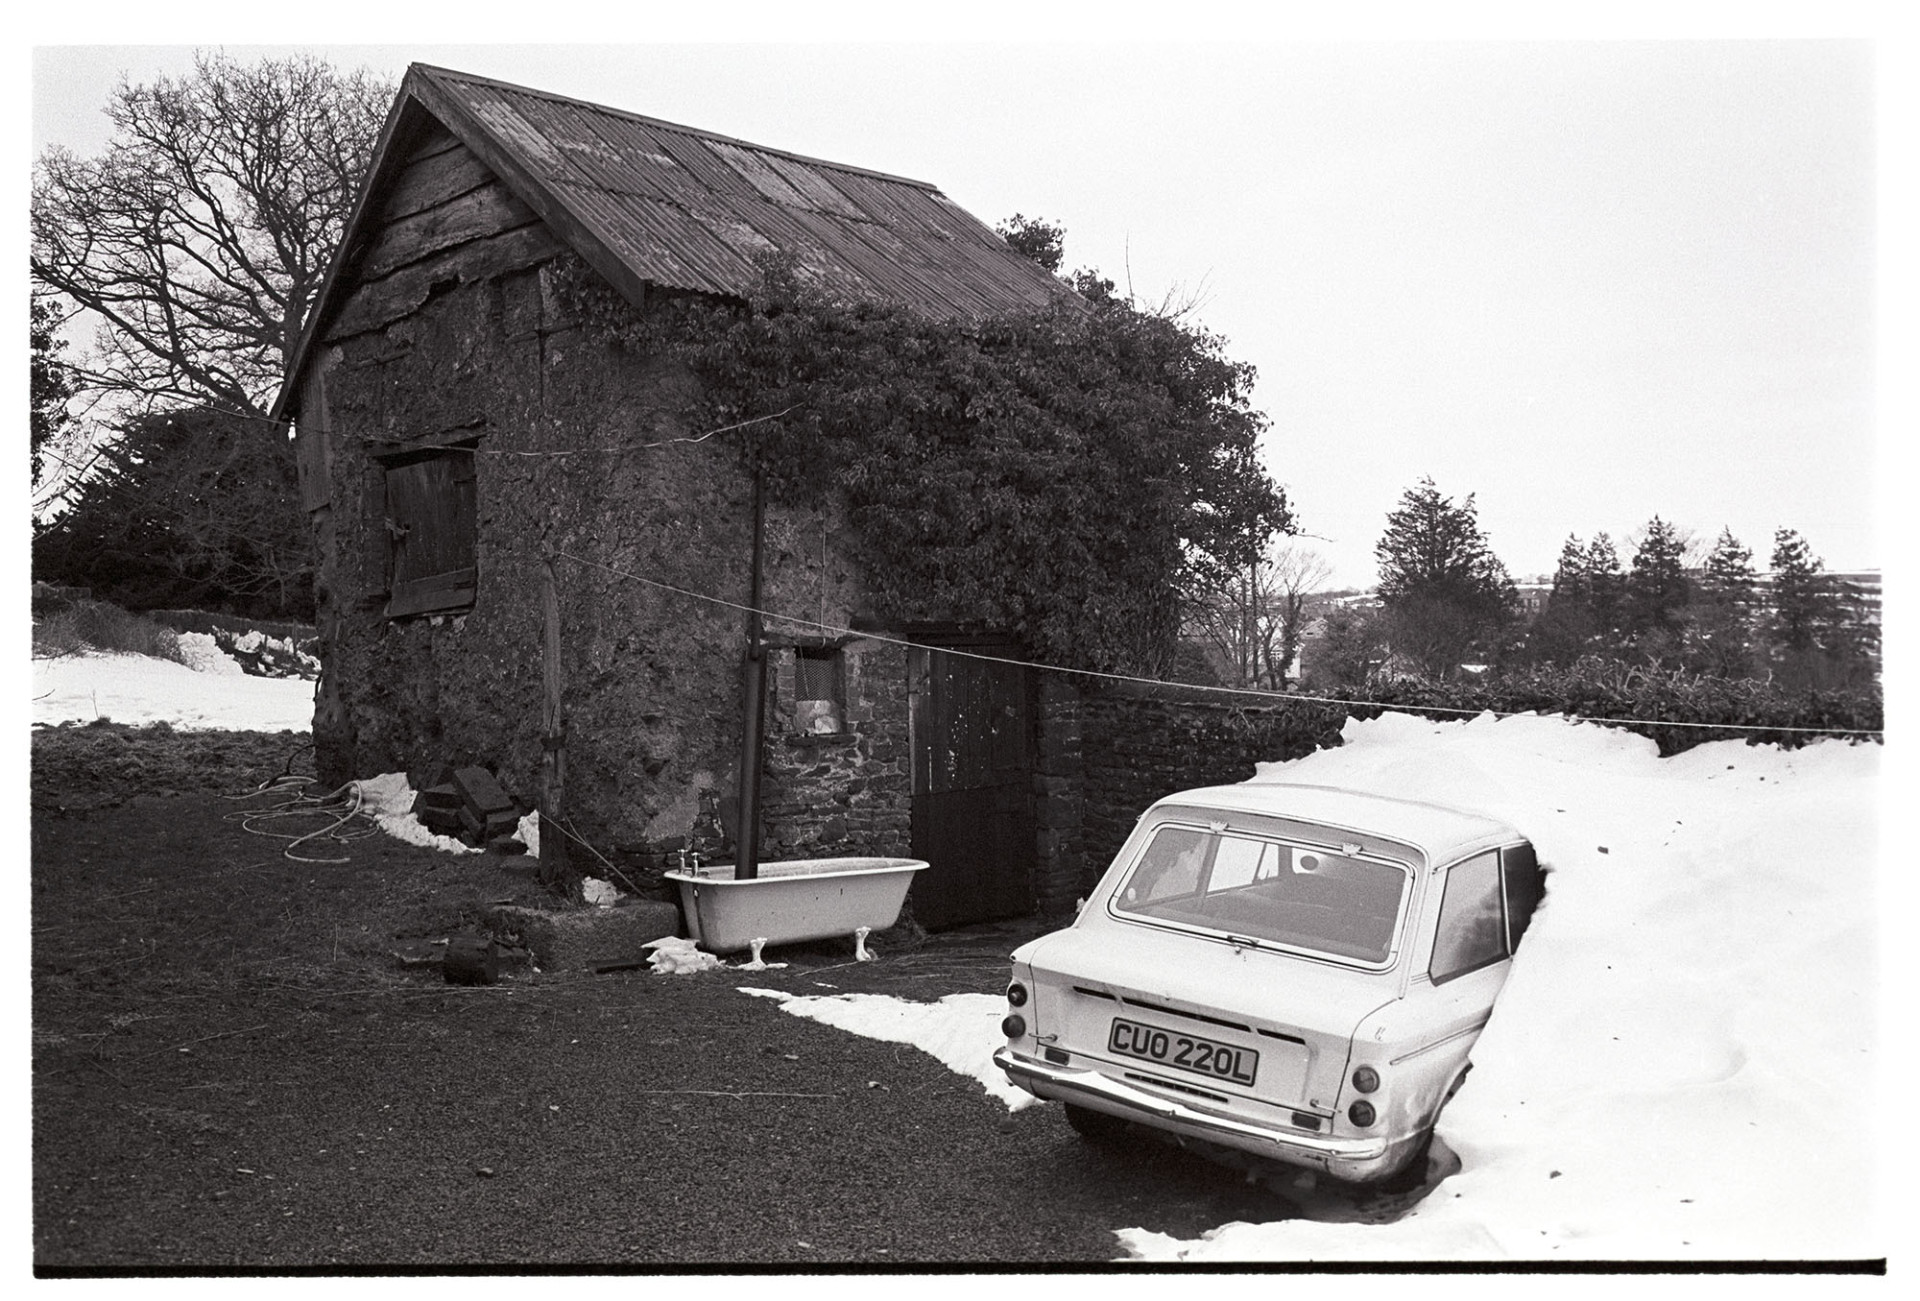 Snow, yard with cob stable barn car in snowdrift, Hillman Imp. 
[A Hillman Imp car covered in a snowdrift at North Ham in Dolton. A stone an corrugated iron barn is in the background, with an old bathtub collecting water from a drainpipe.
See the 'Additional notes by James Ravilious field for more information'.]